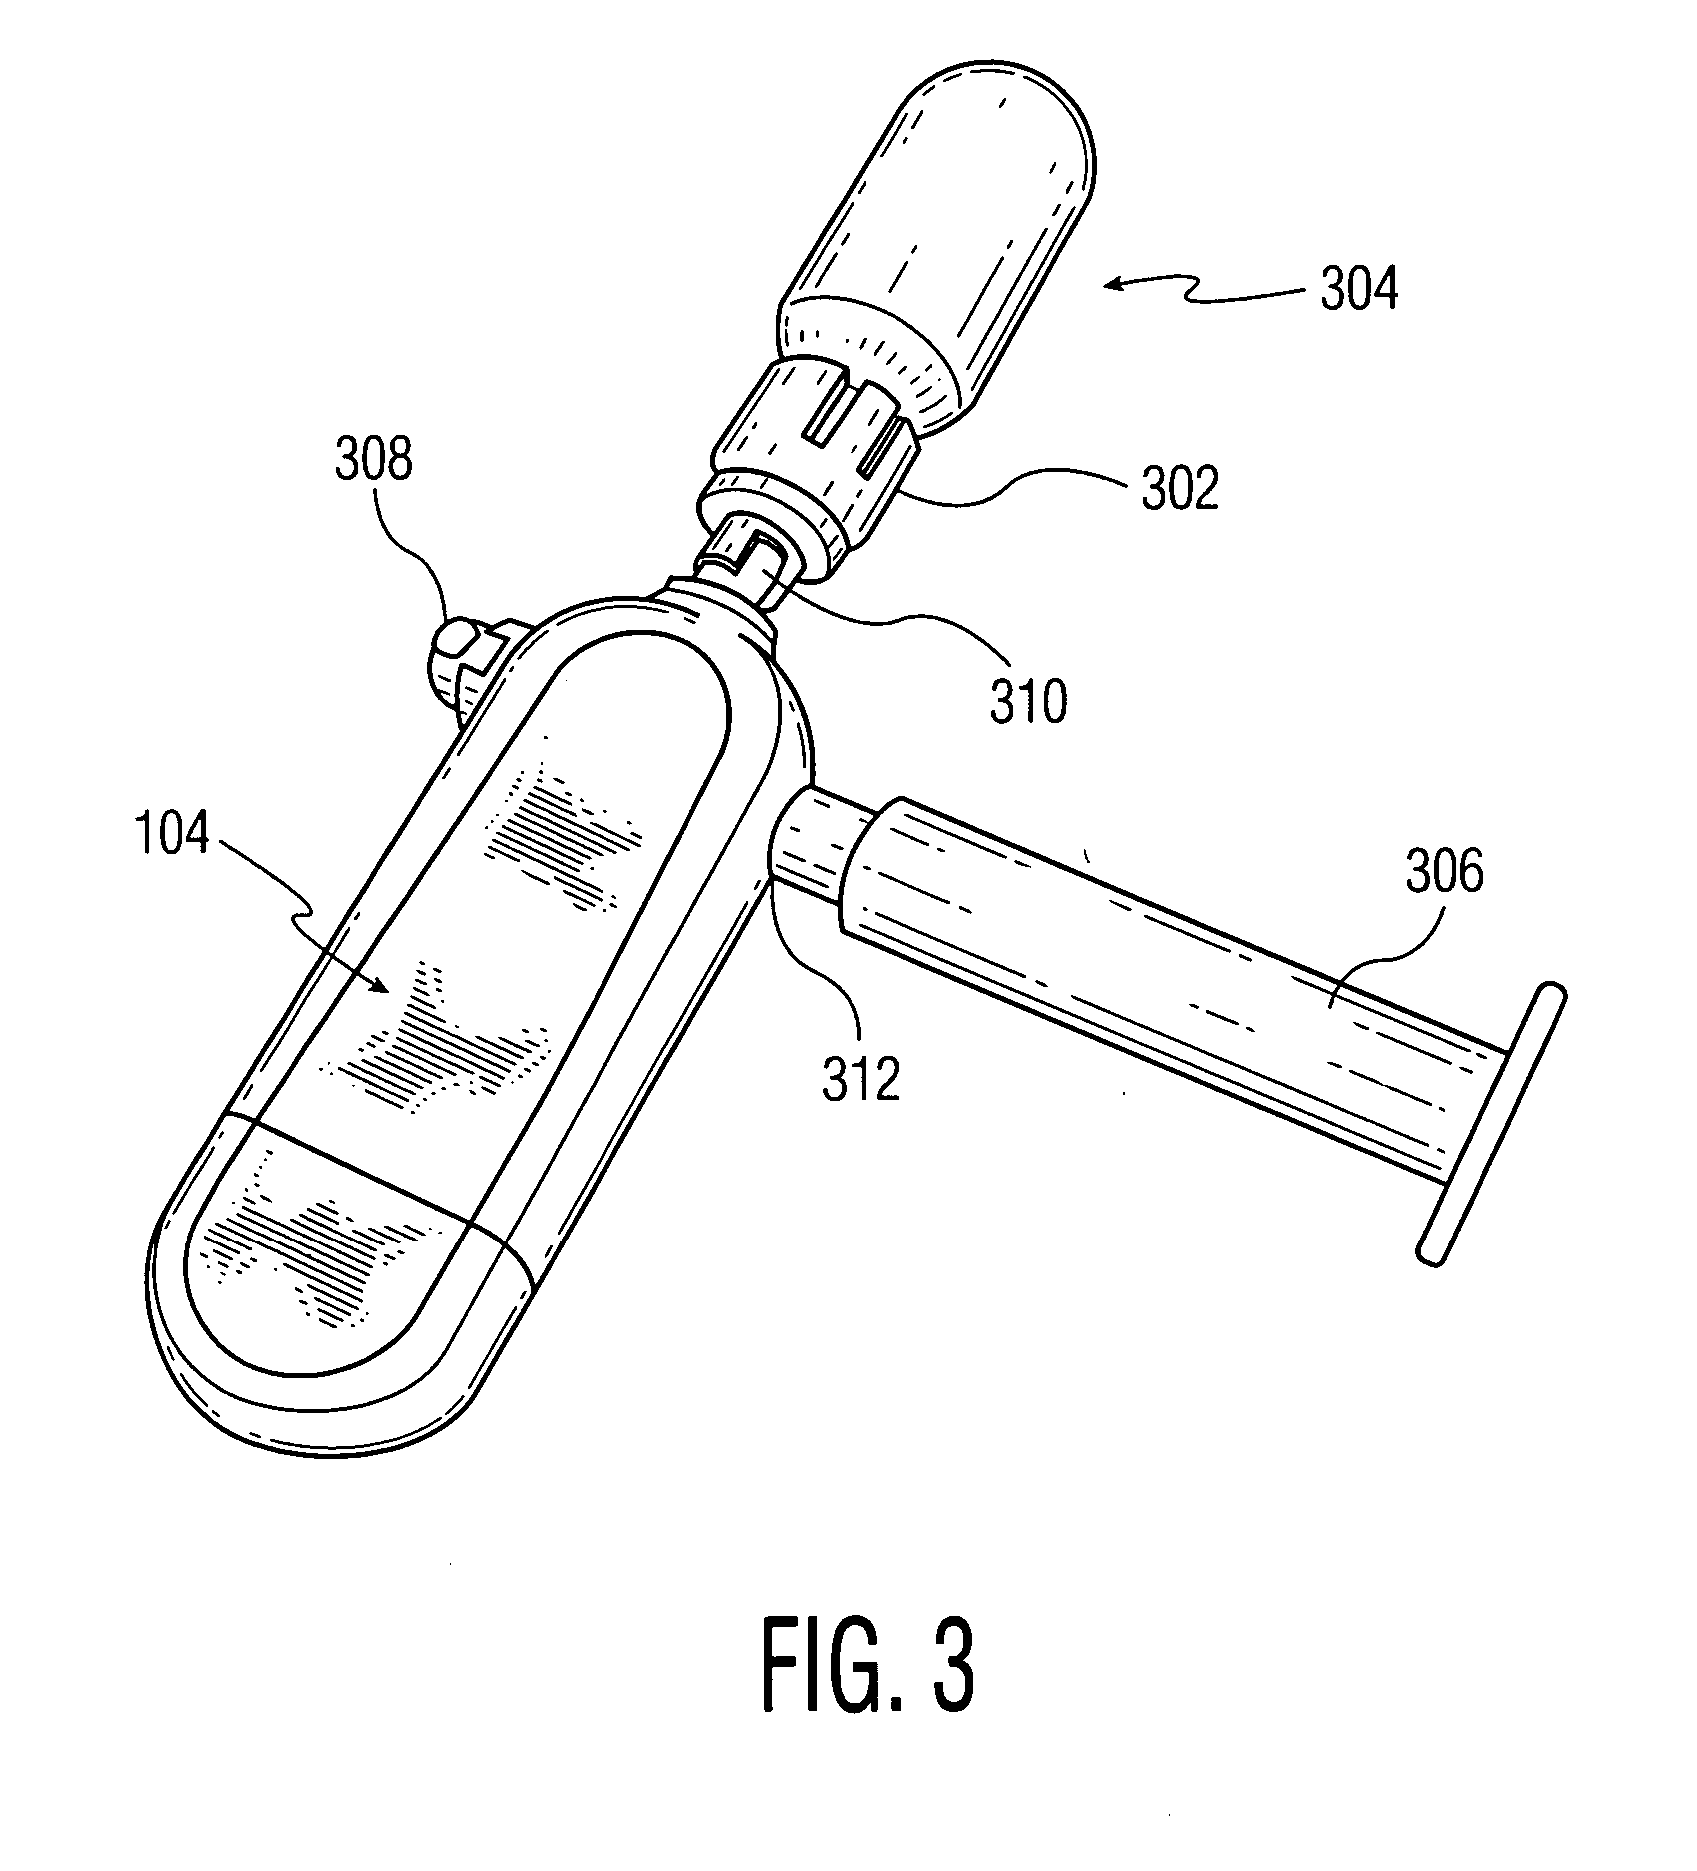 Medical infusion device having a refillable reservoir and switch for controlling fluid direction